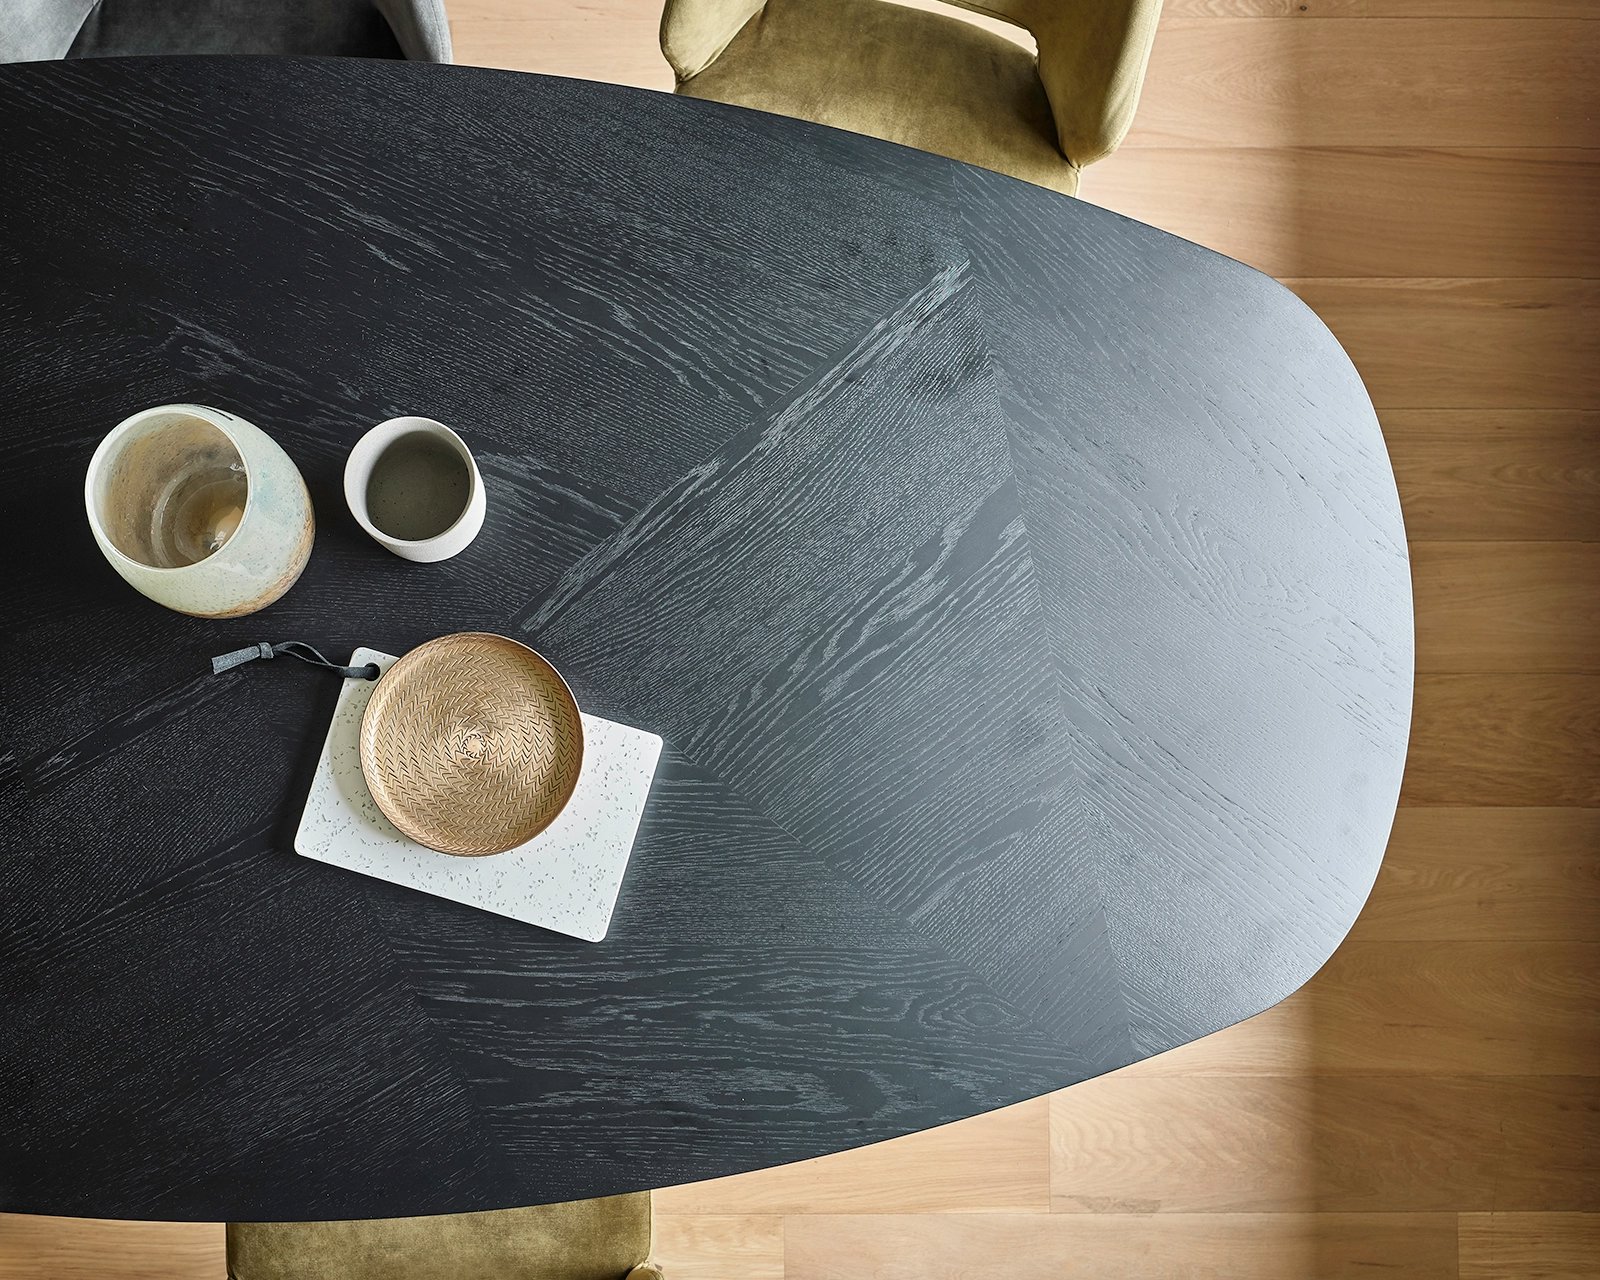 Oval dining table Eclipse